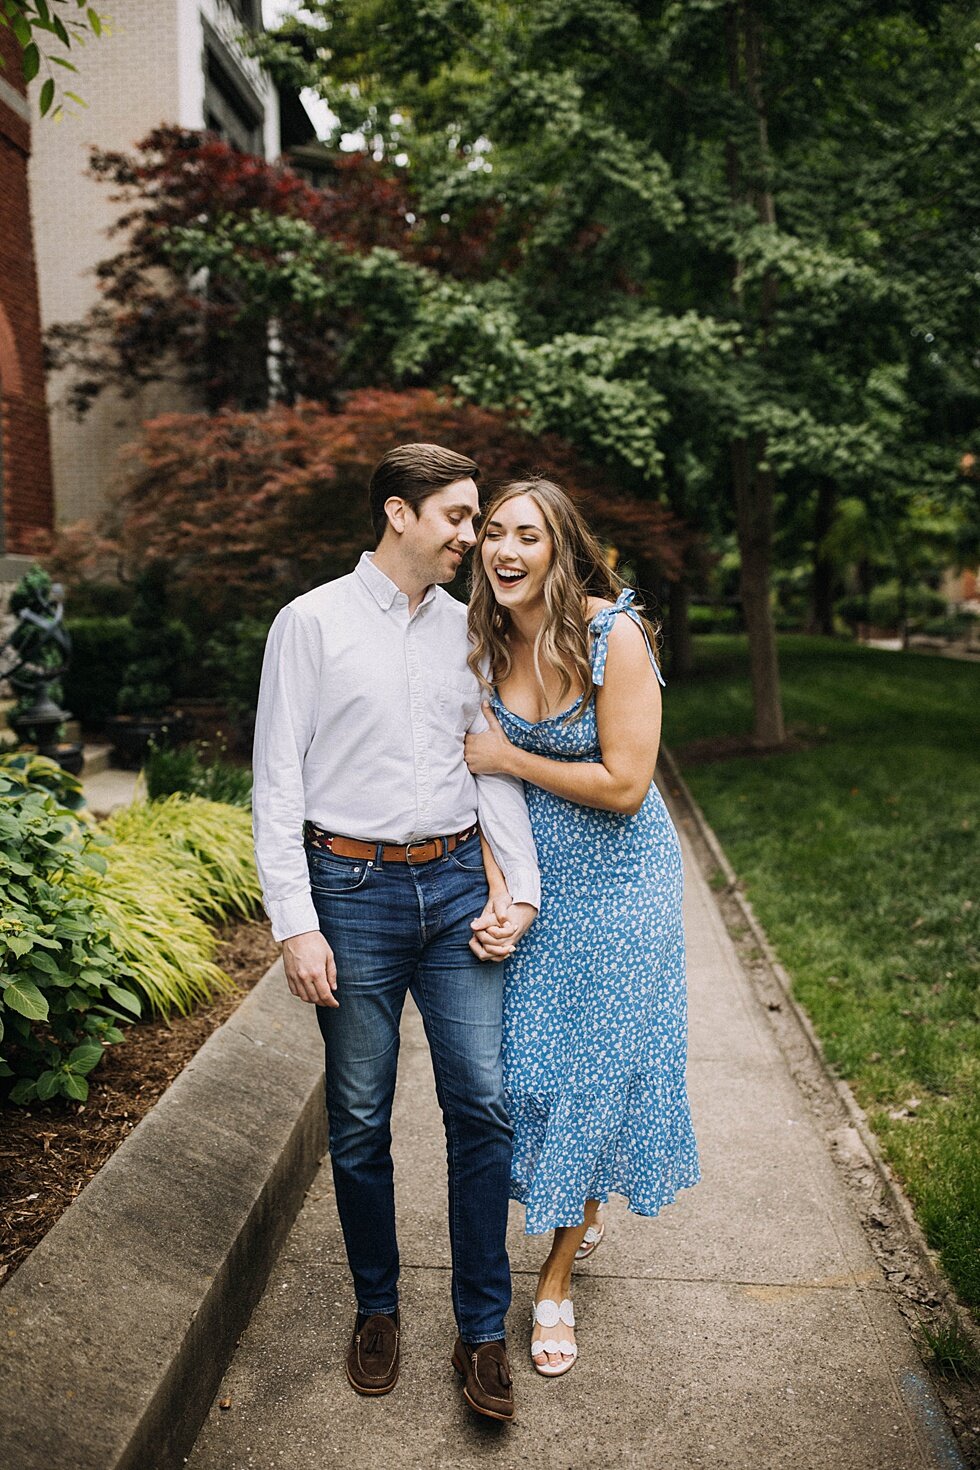  Natural laugh shared between these two as they walk down the pathway in the St James Court gardens. Stunning blue dress semi formal  urban engagements #engagementphotos #savethedatephotos #savethedates #engagementphotography  #StJamesCourt #gardenen